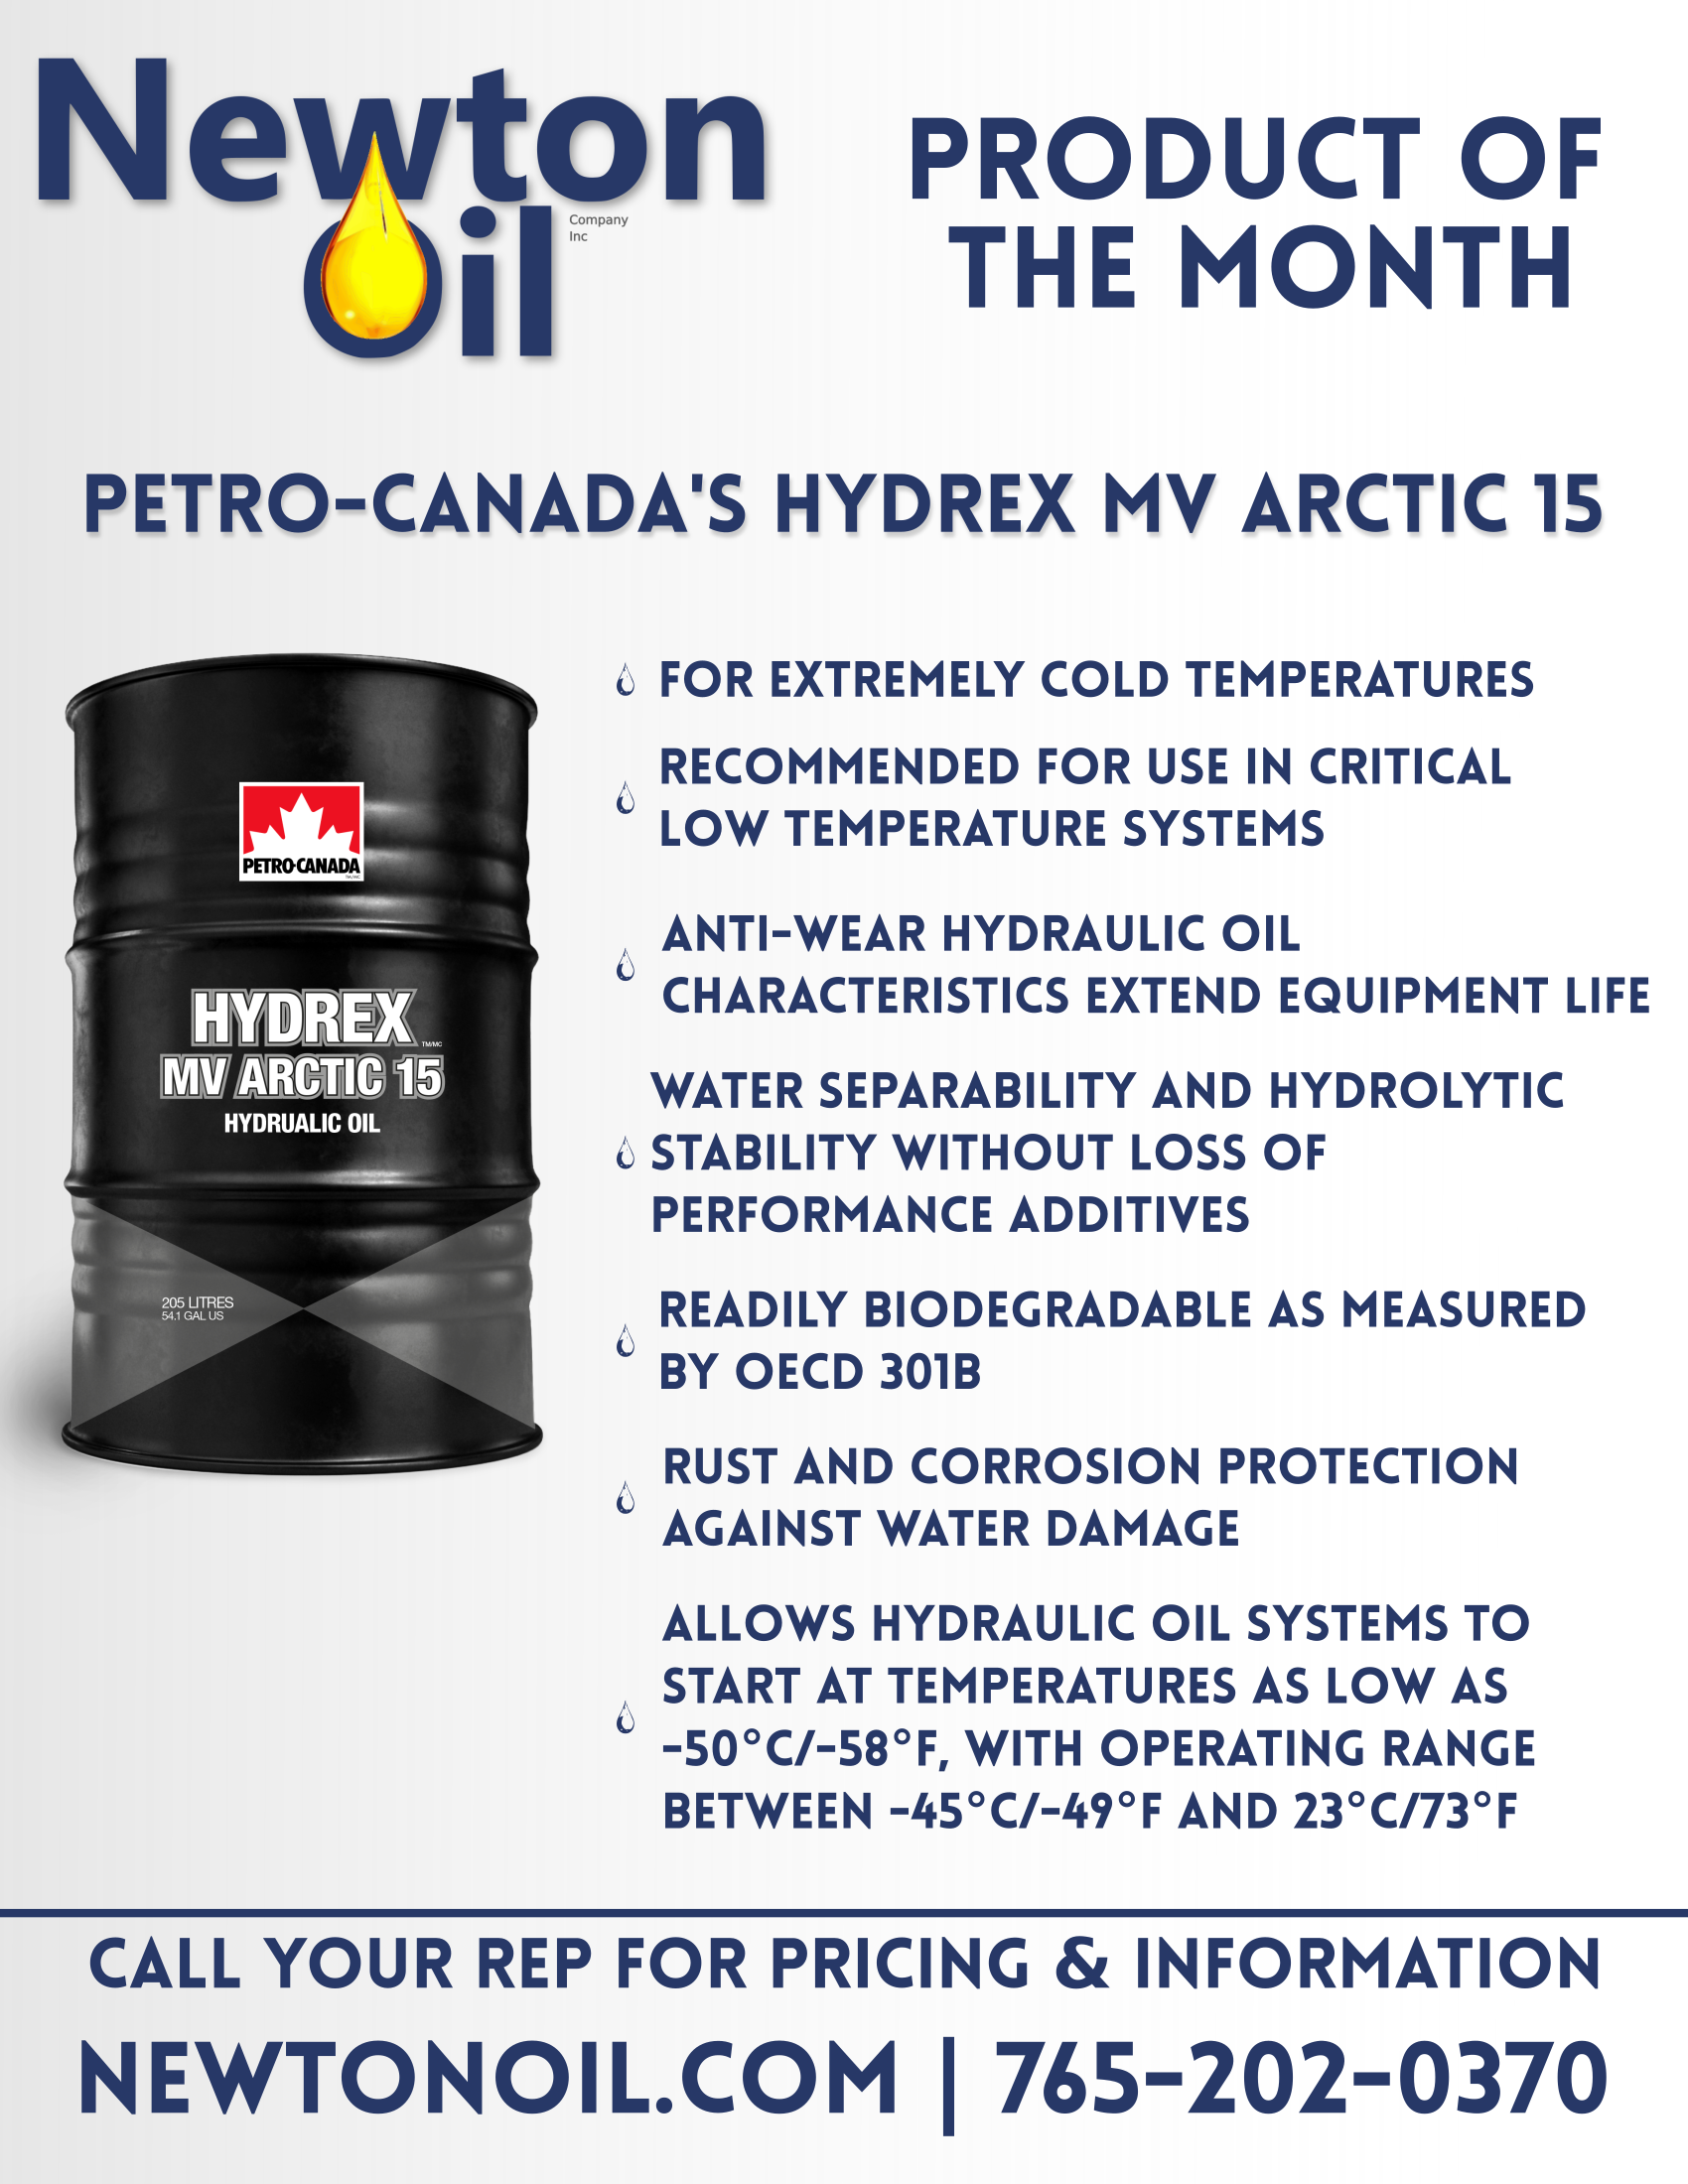 Product of the Month: Petro-Canada Hydrex Artic MV 15